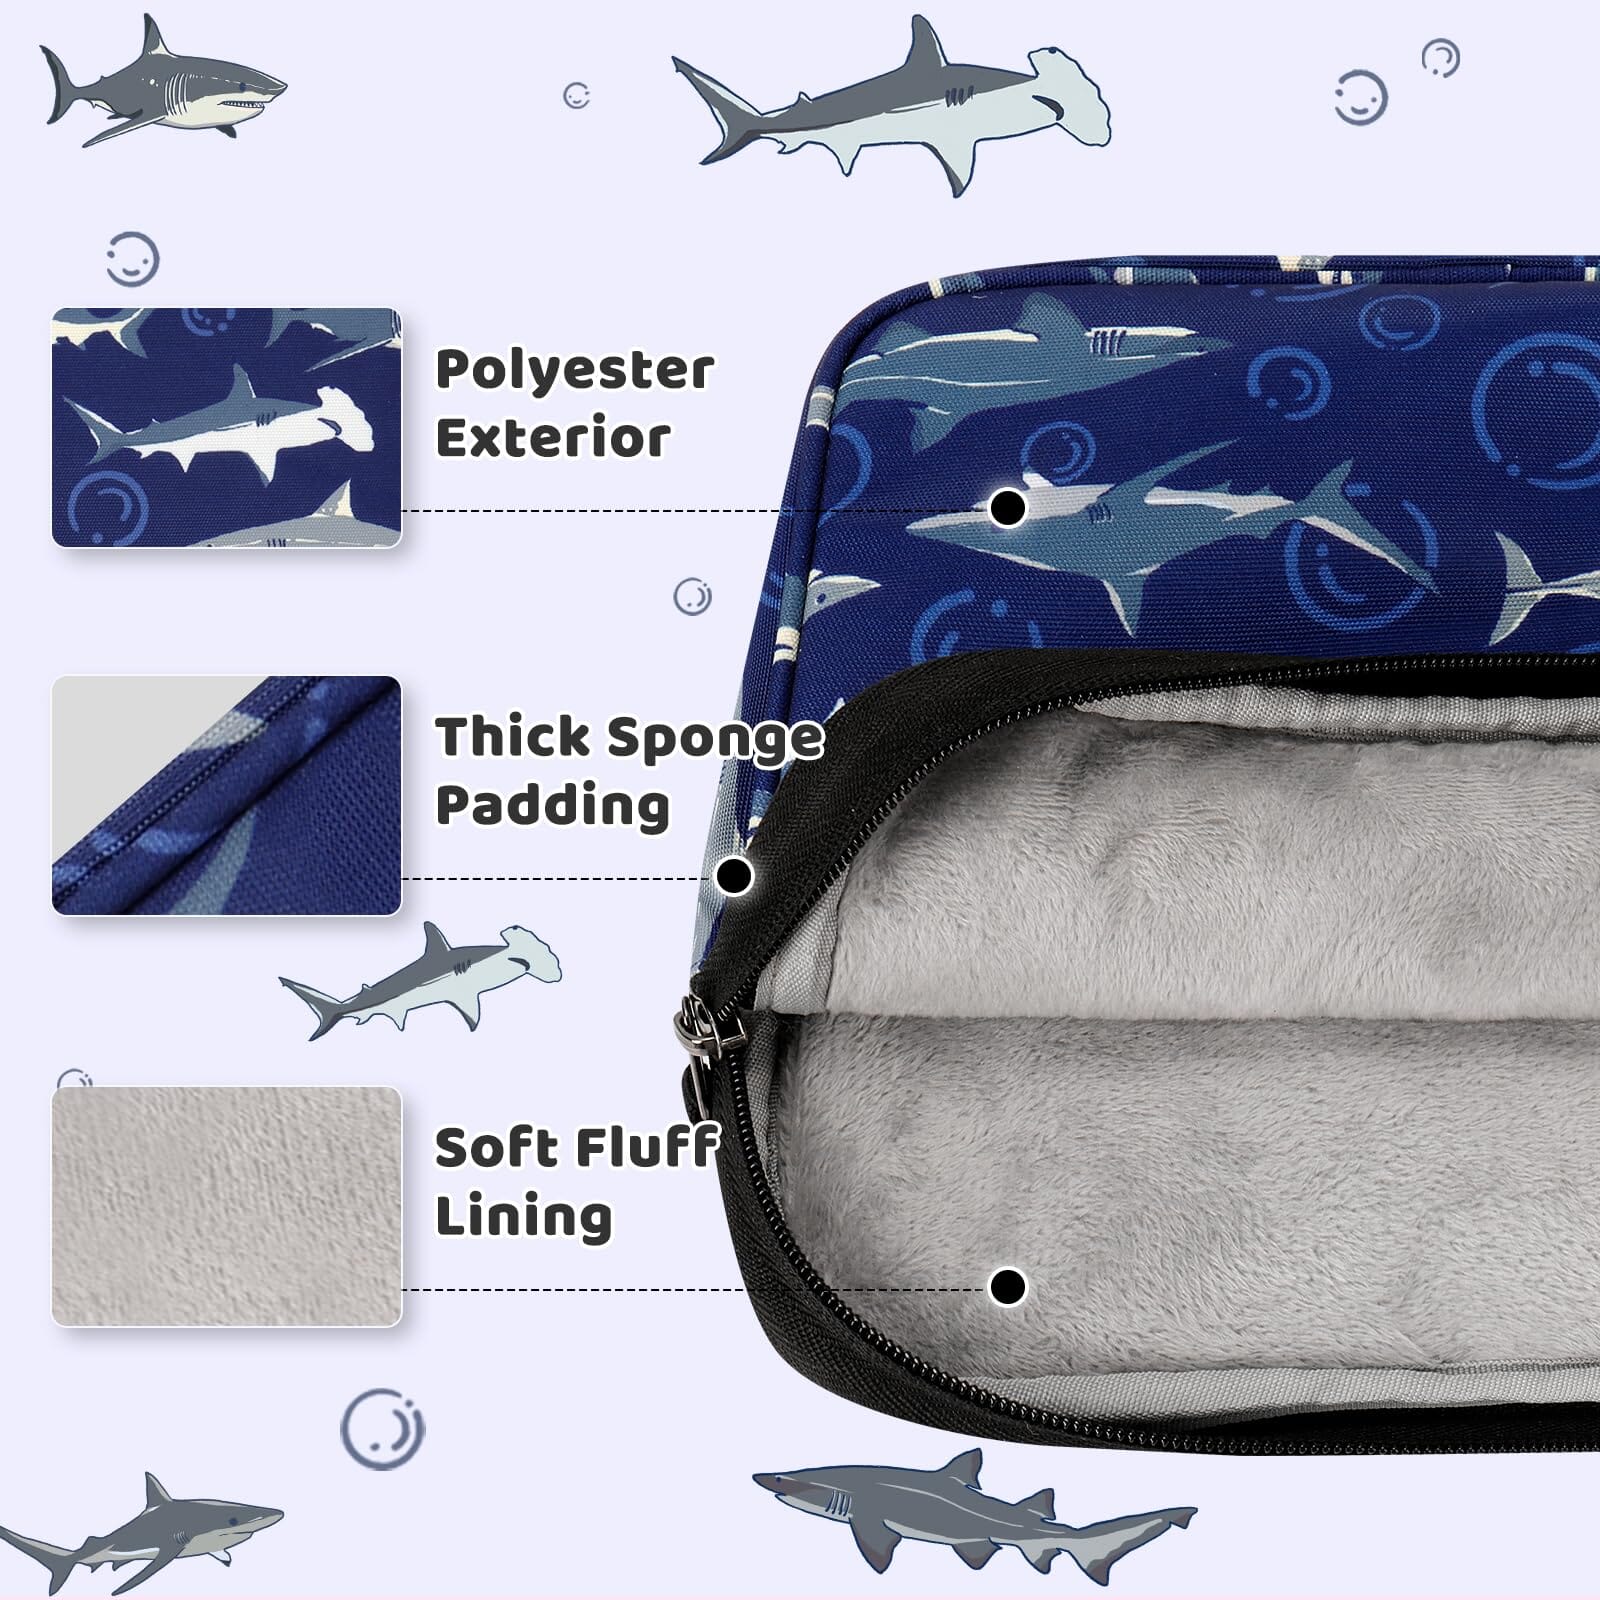 Choco Mocha 11 Inch Kids Tablet Sleeve Bag for Boys, Kids Tablet Carrying Case for Fire 7, Fire HD 8 Tablet, Kindle Kids Edition, iPad, Shark, Navy chocomochakids 